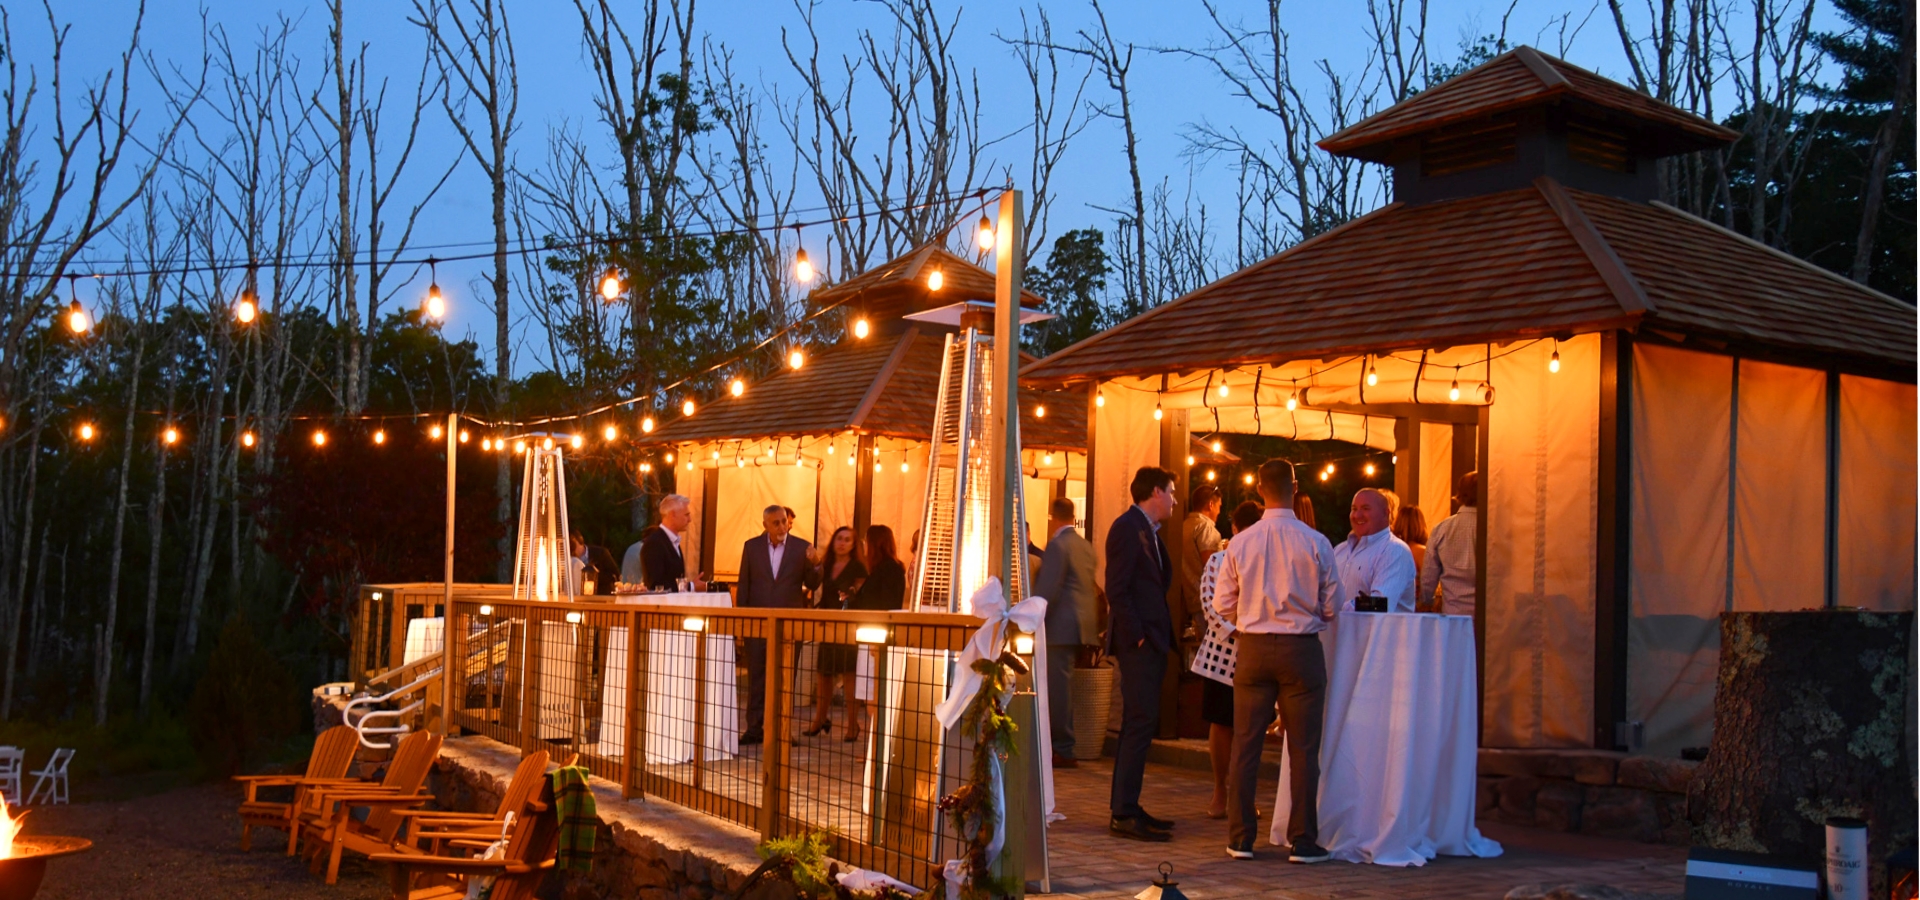 An enchanting evening of scotch and cigars under the stars at The Preserve Resort & Spa, Rhode Island.